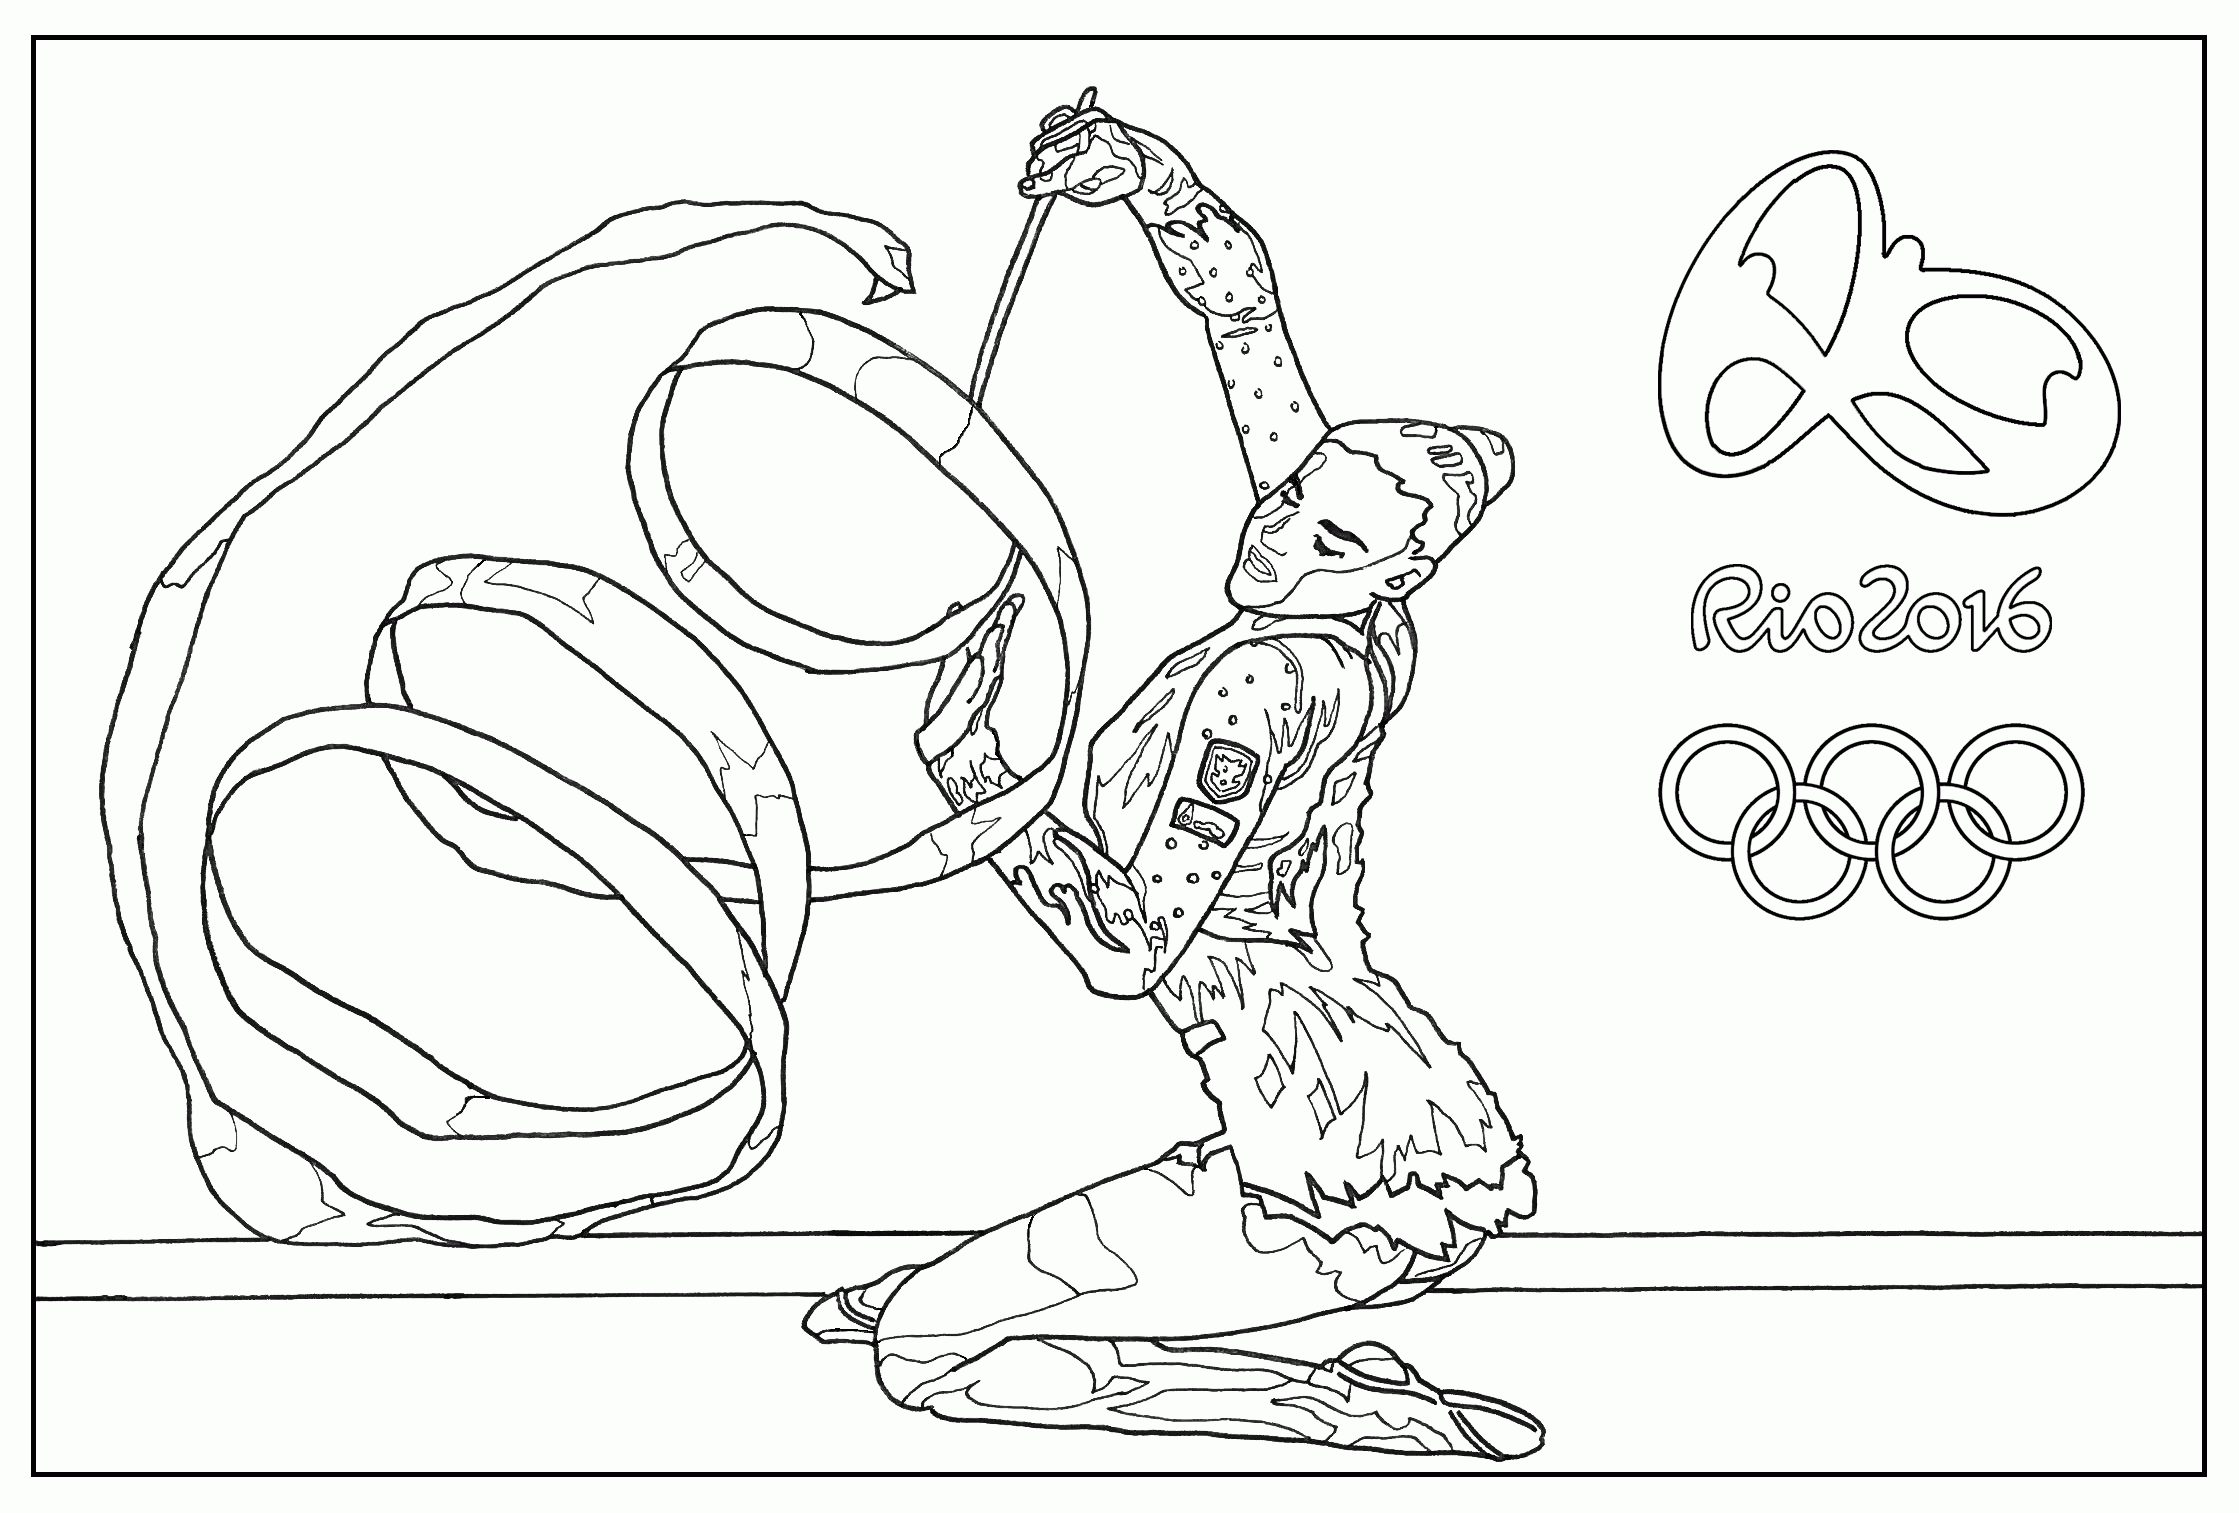 Rio 2016 Summer Olympic Games coloring page